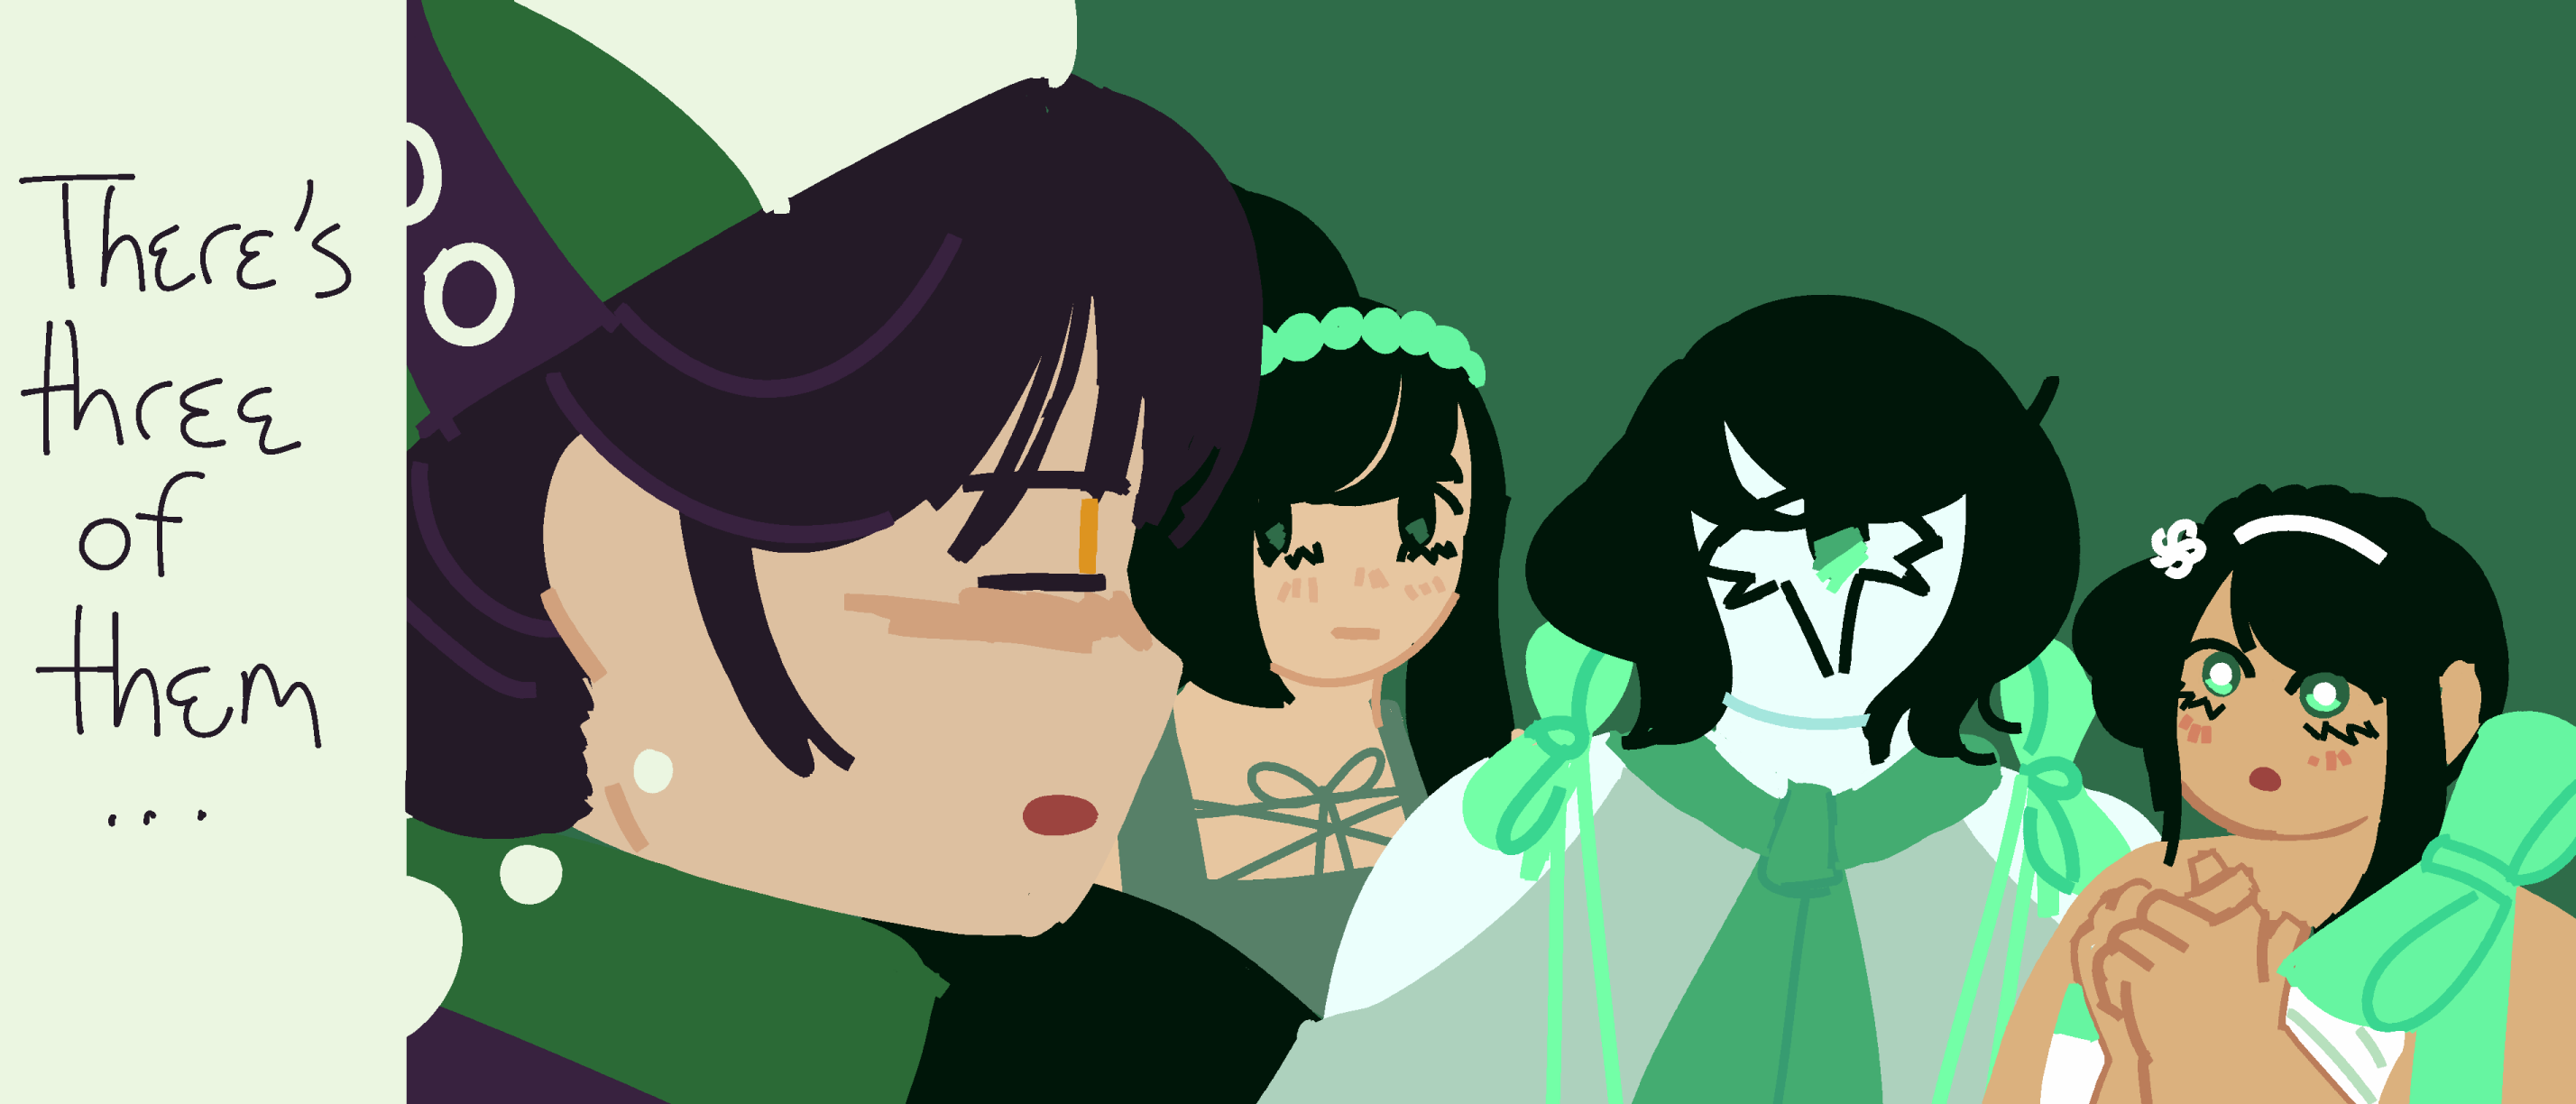 Chrysanthemum stares at Forrest, GARDENIA, and Sherardia with squinted eyes. Ze's thinking 'There's three of them'